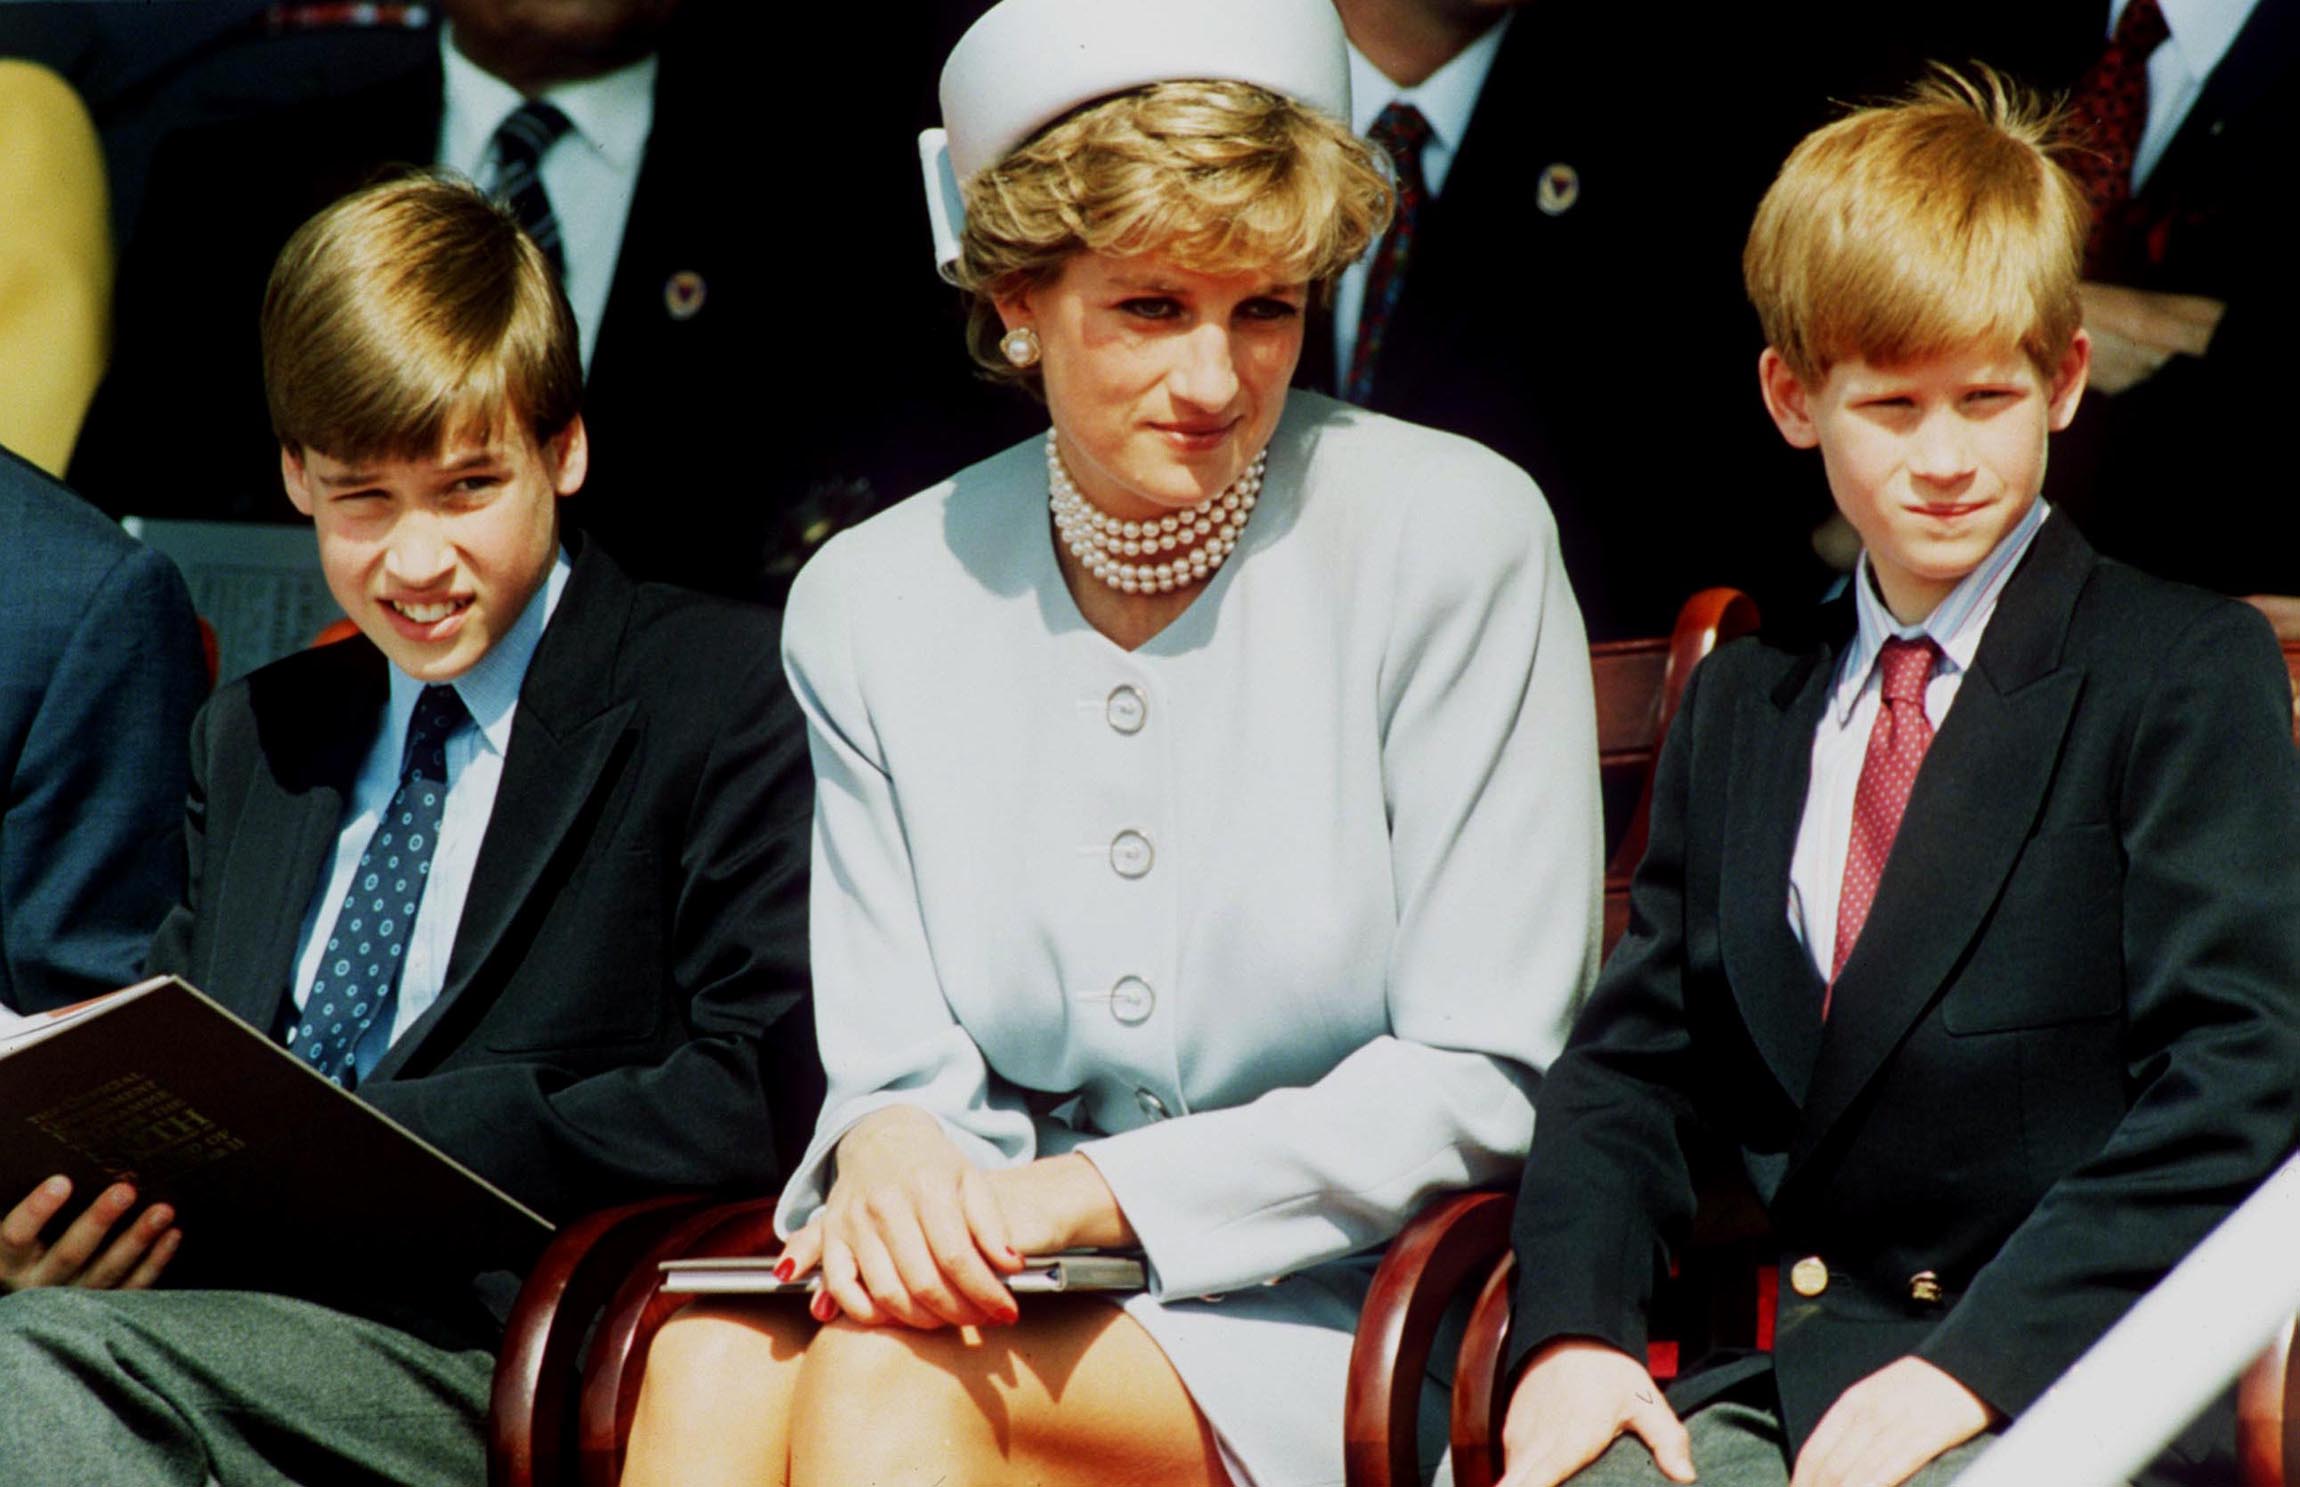 Prince William, Princess Diana, and Prince Harry sit together.